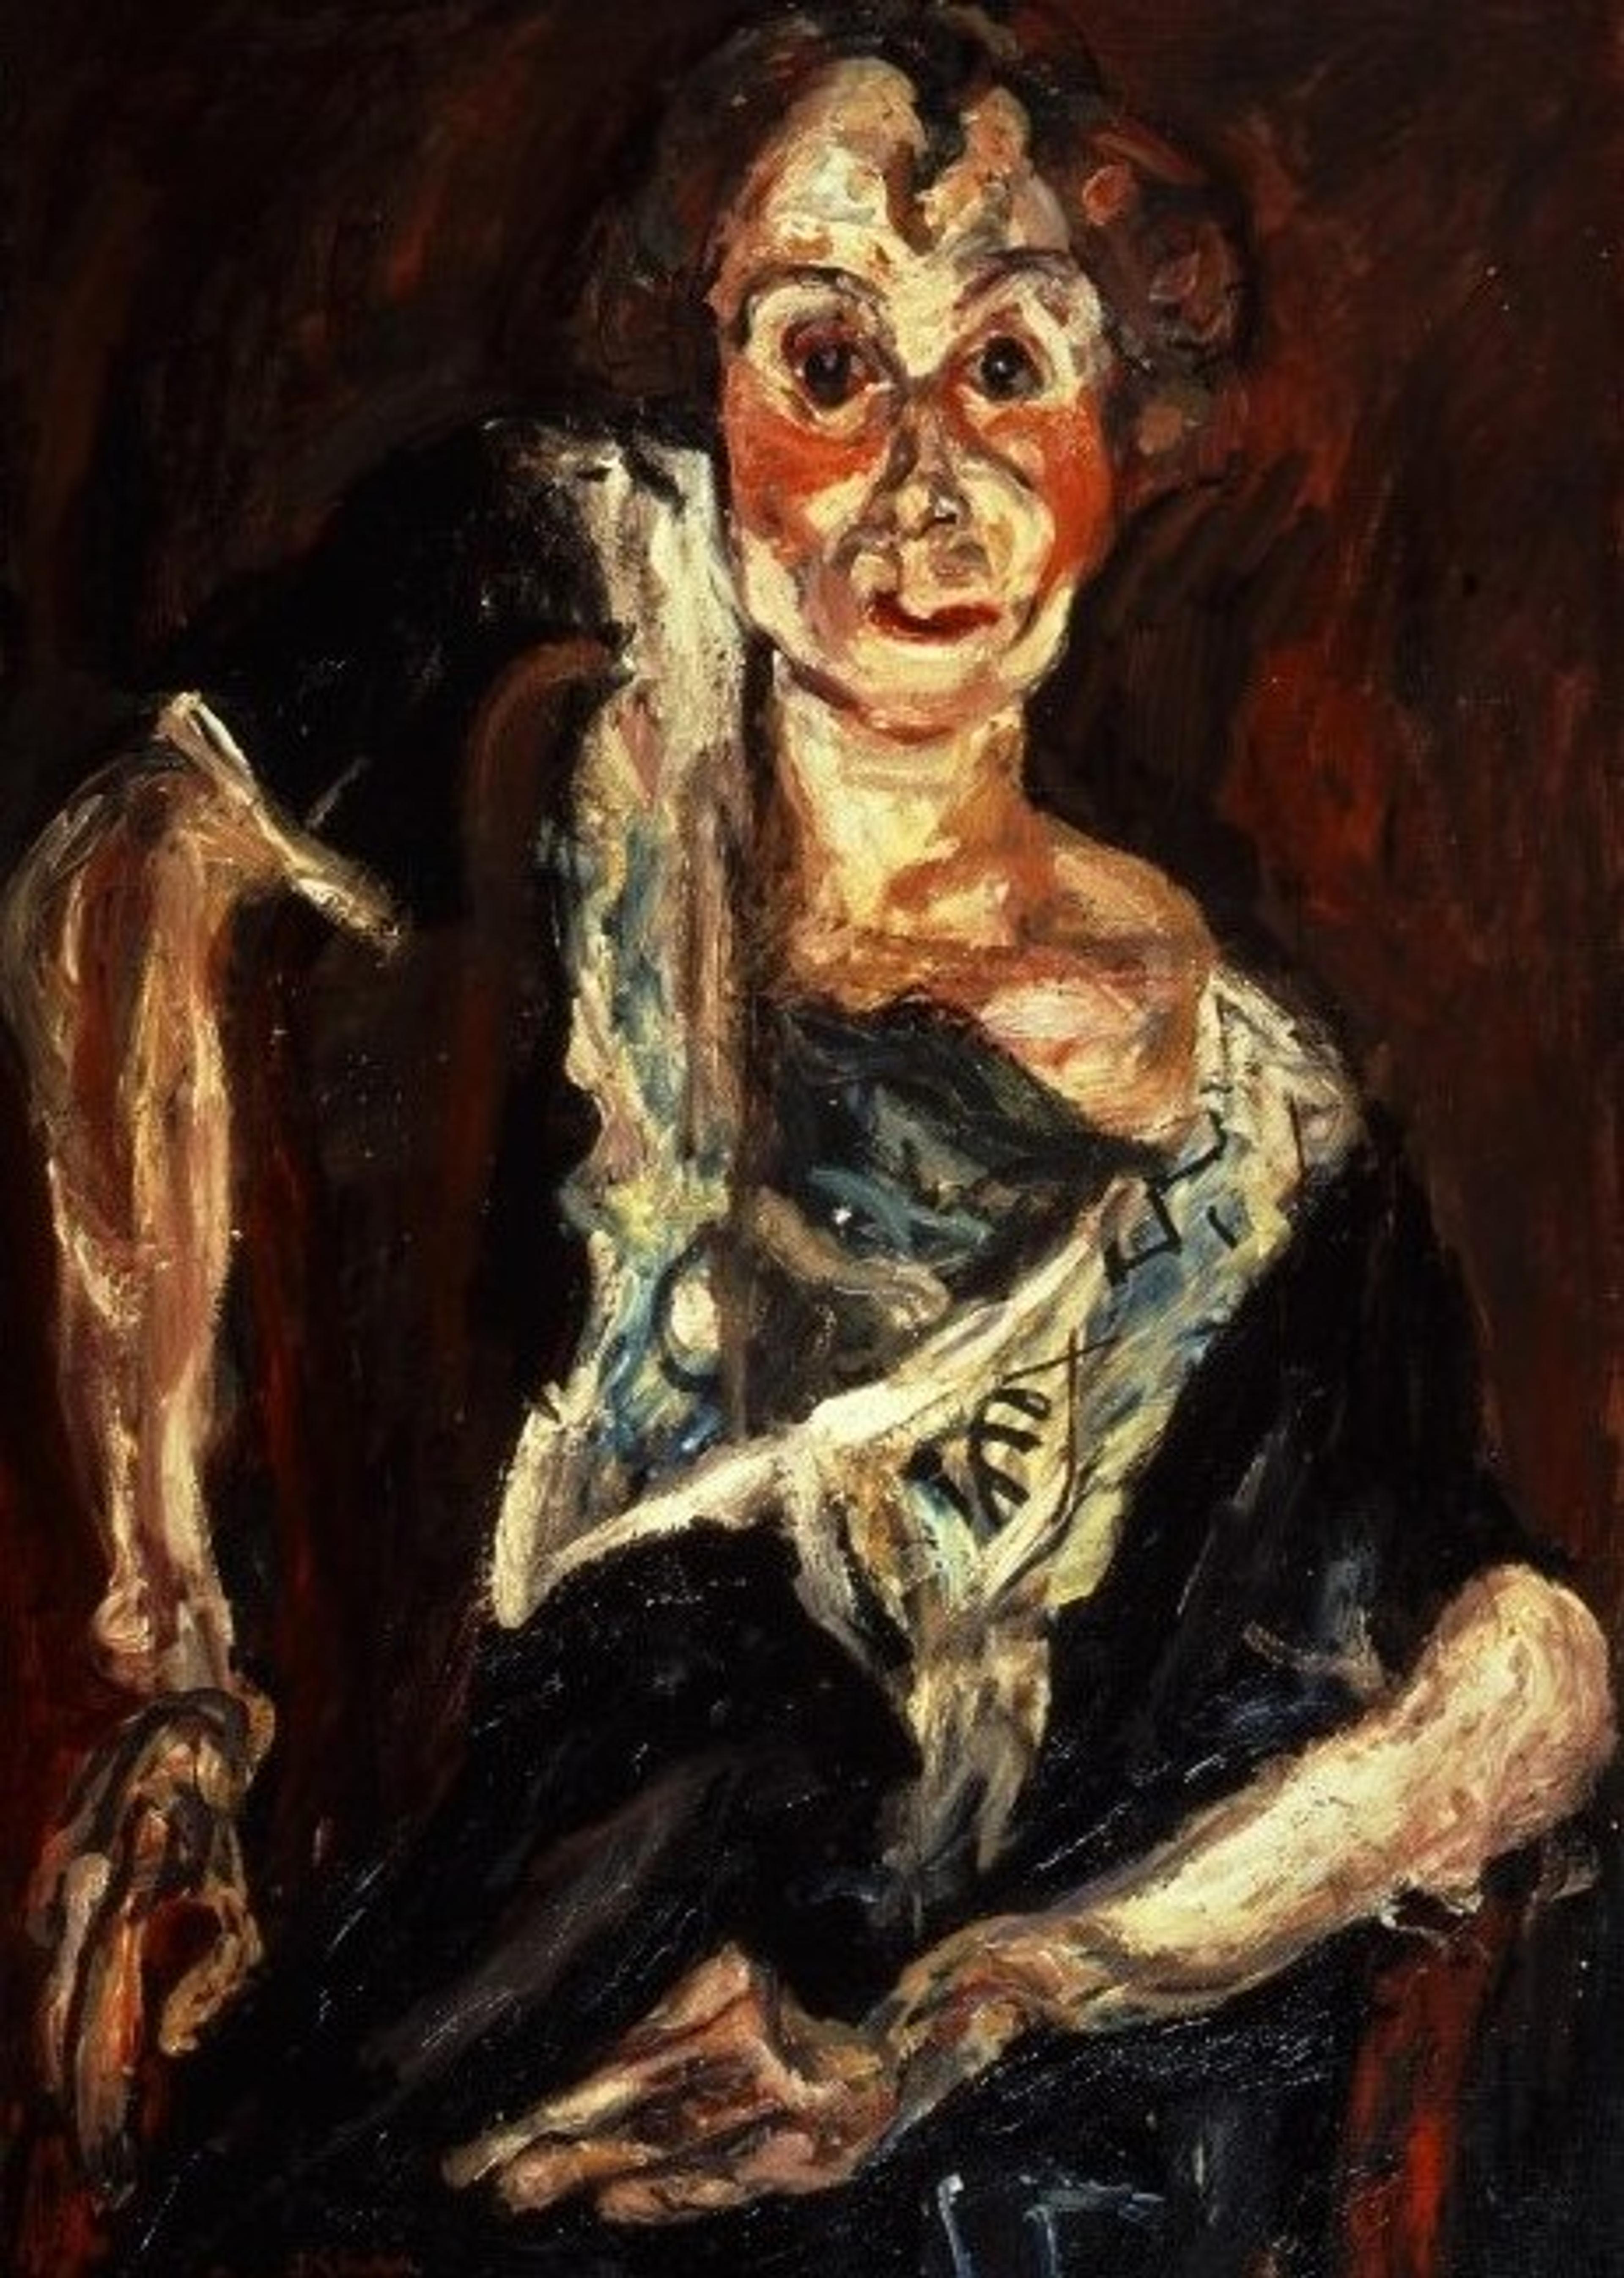 La Vieille actrice (The Old Actress), 1922, oil on canvas, 92.1 x 65.1 cm